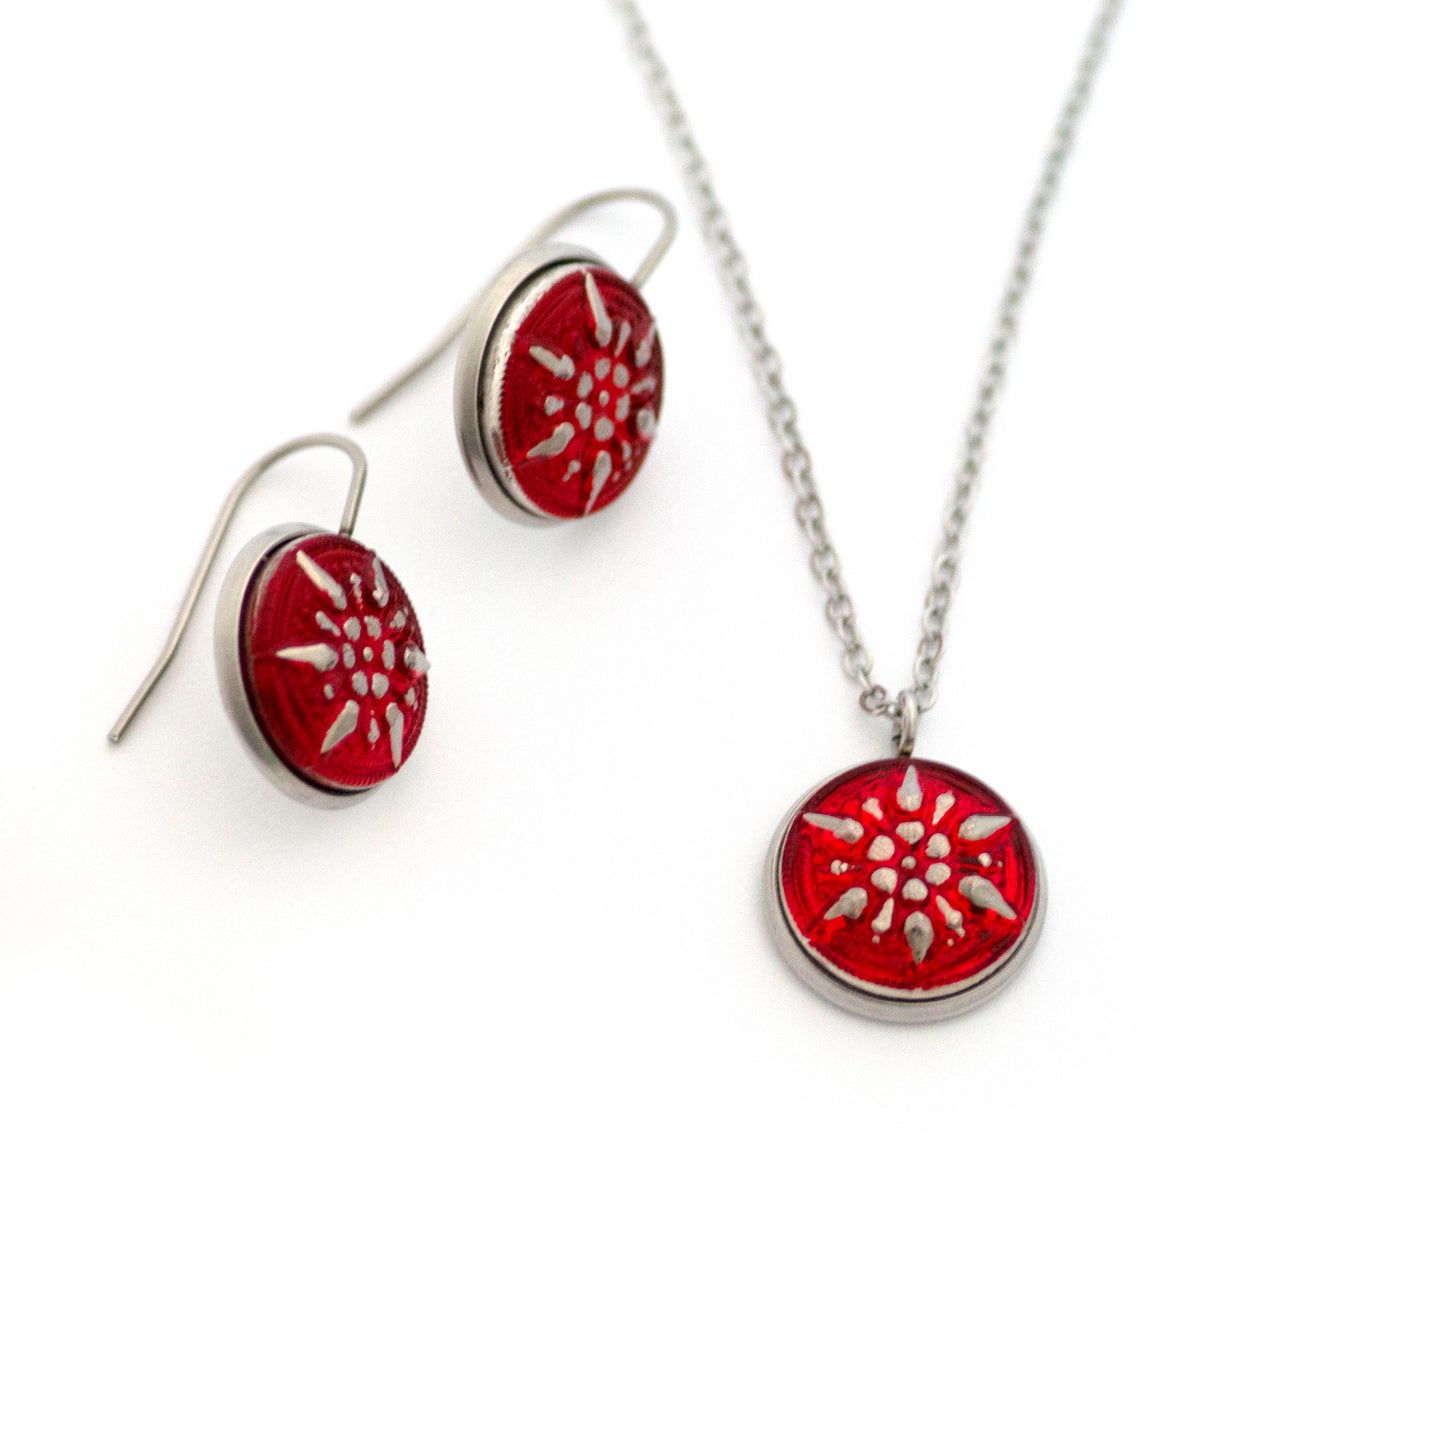 Red and Silver Star Czech Glass Button Necklace and Earrings Gift Set